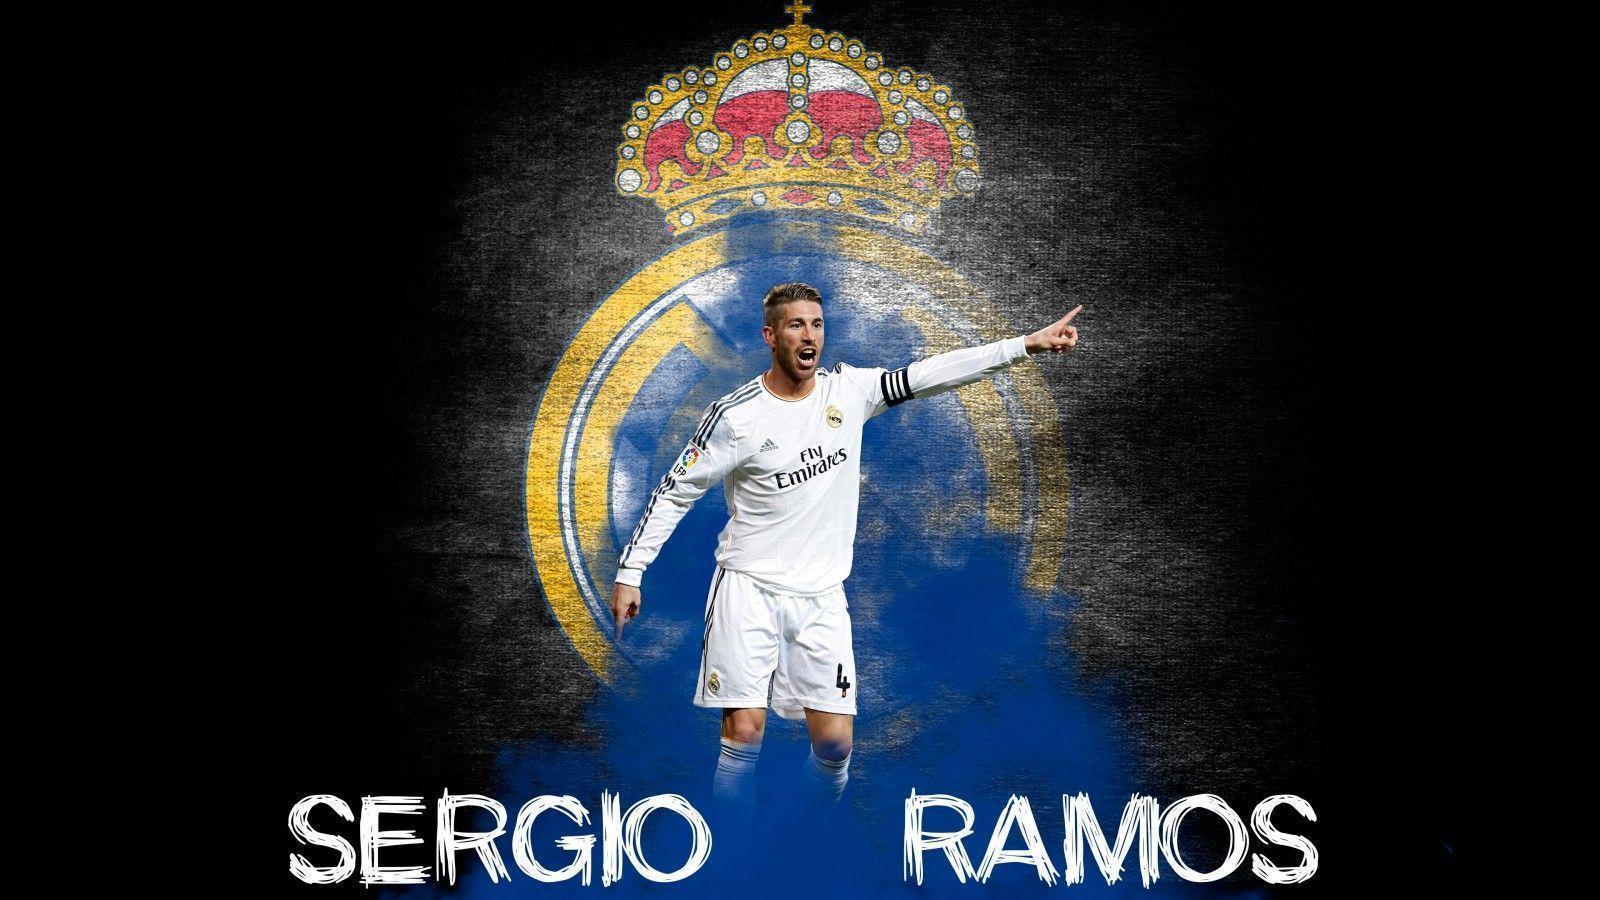 Sergio Ramos 2014 Real Madrid Wallpaper Wide or HD. Male